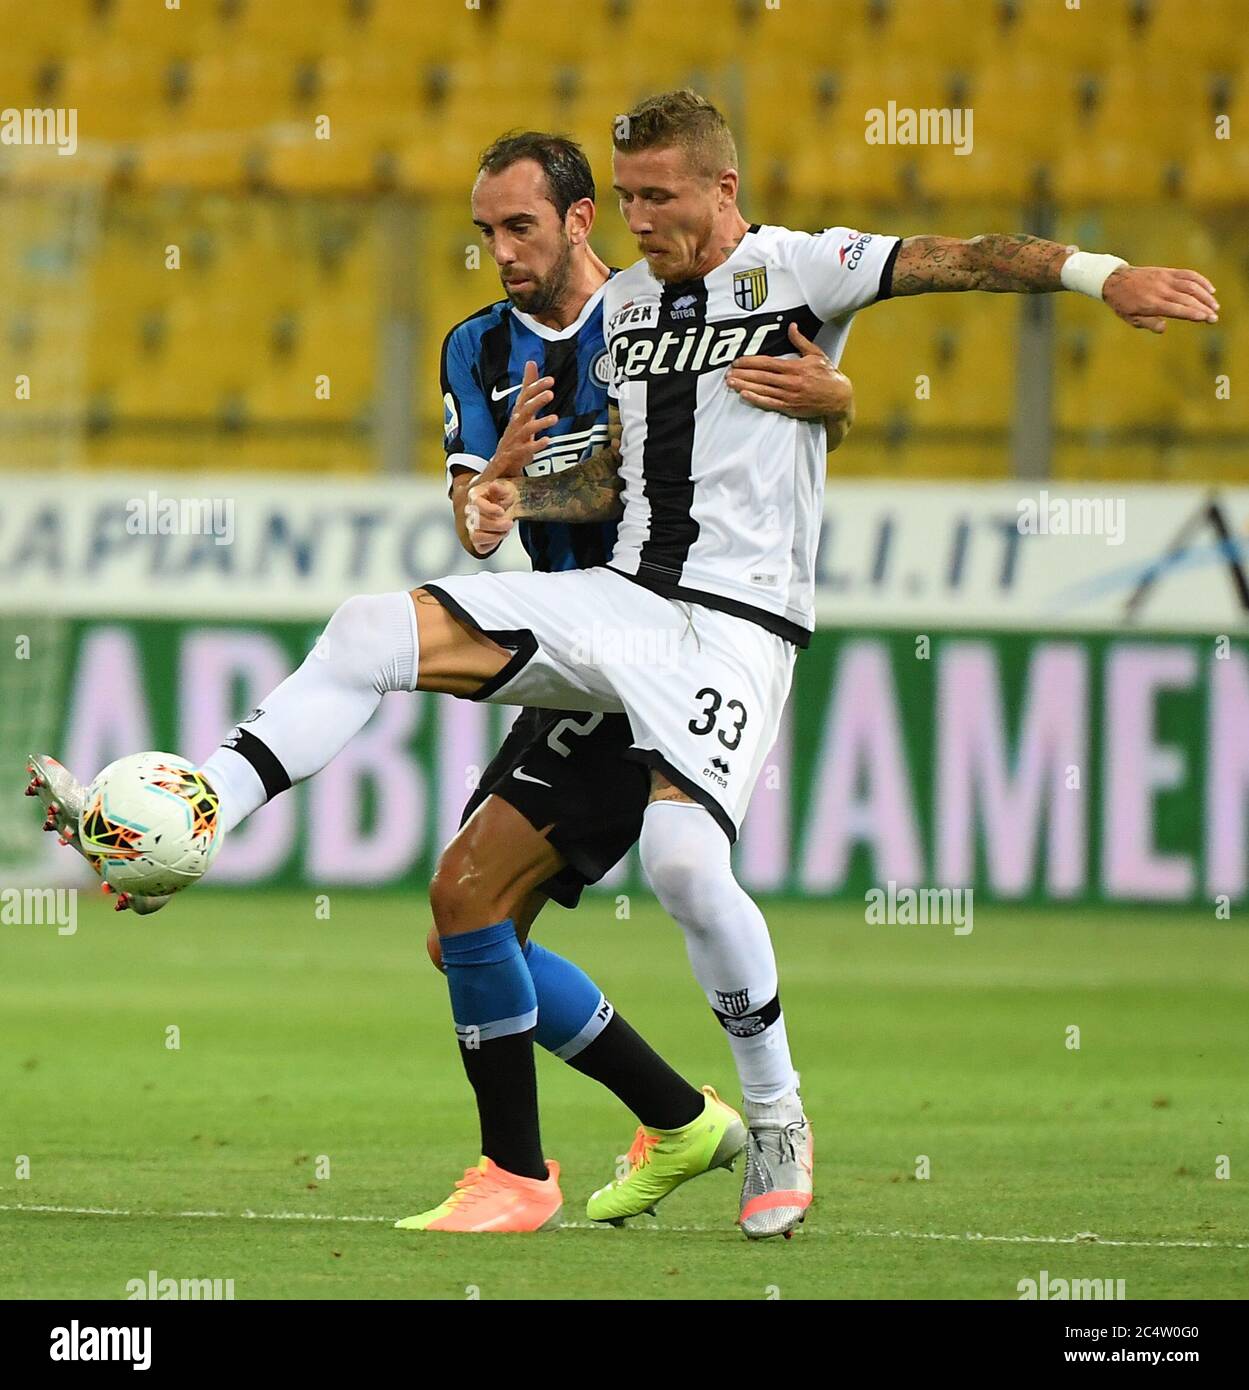 Parma, Italy. 28th June, 2020. Inter Milan's Diego Godin (L) vies with Parma's Juray Kucka during a Serie A match between Parma and Inter Milan in Parma, Italy, June 28, 2020. Credit: Alberto Lingria/Xinhua/Alamy Live News Stock Photo